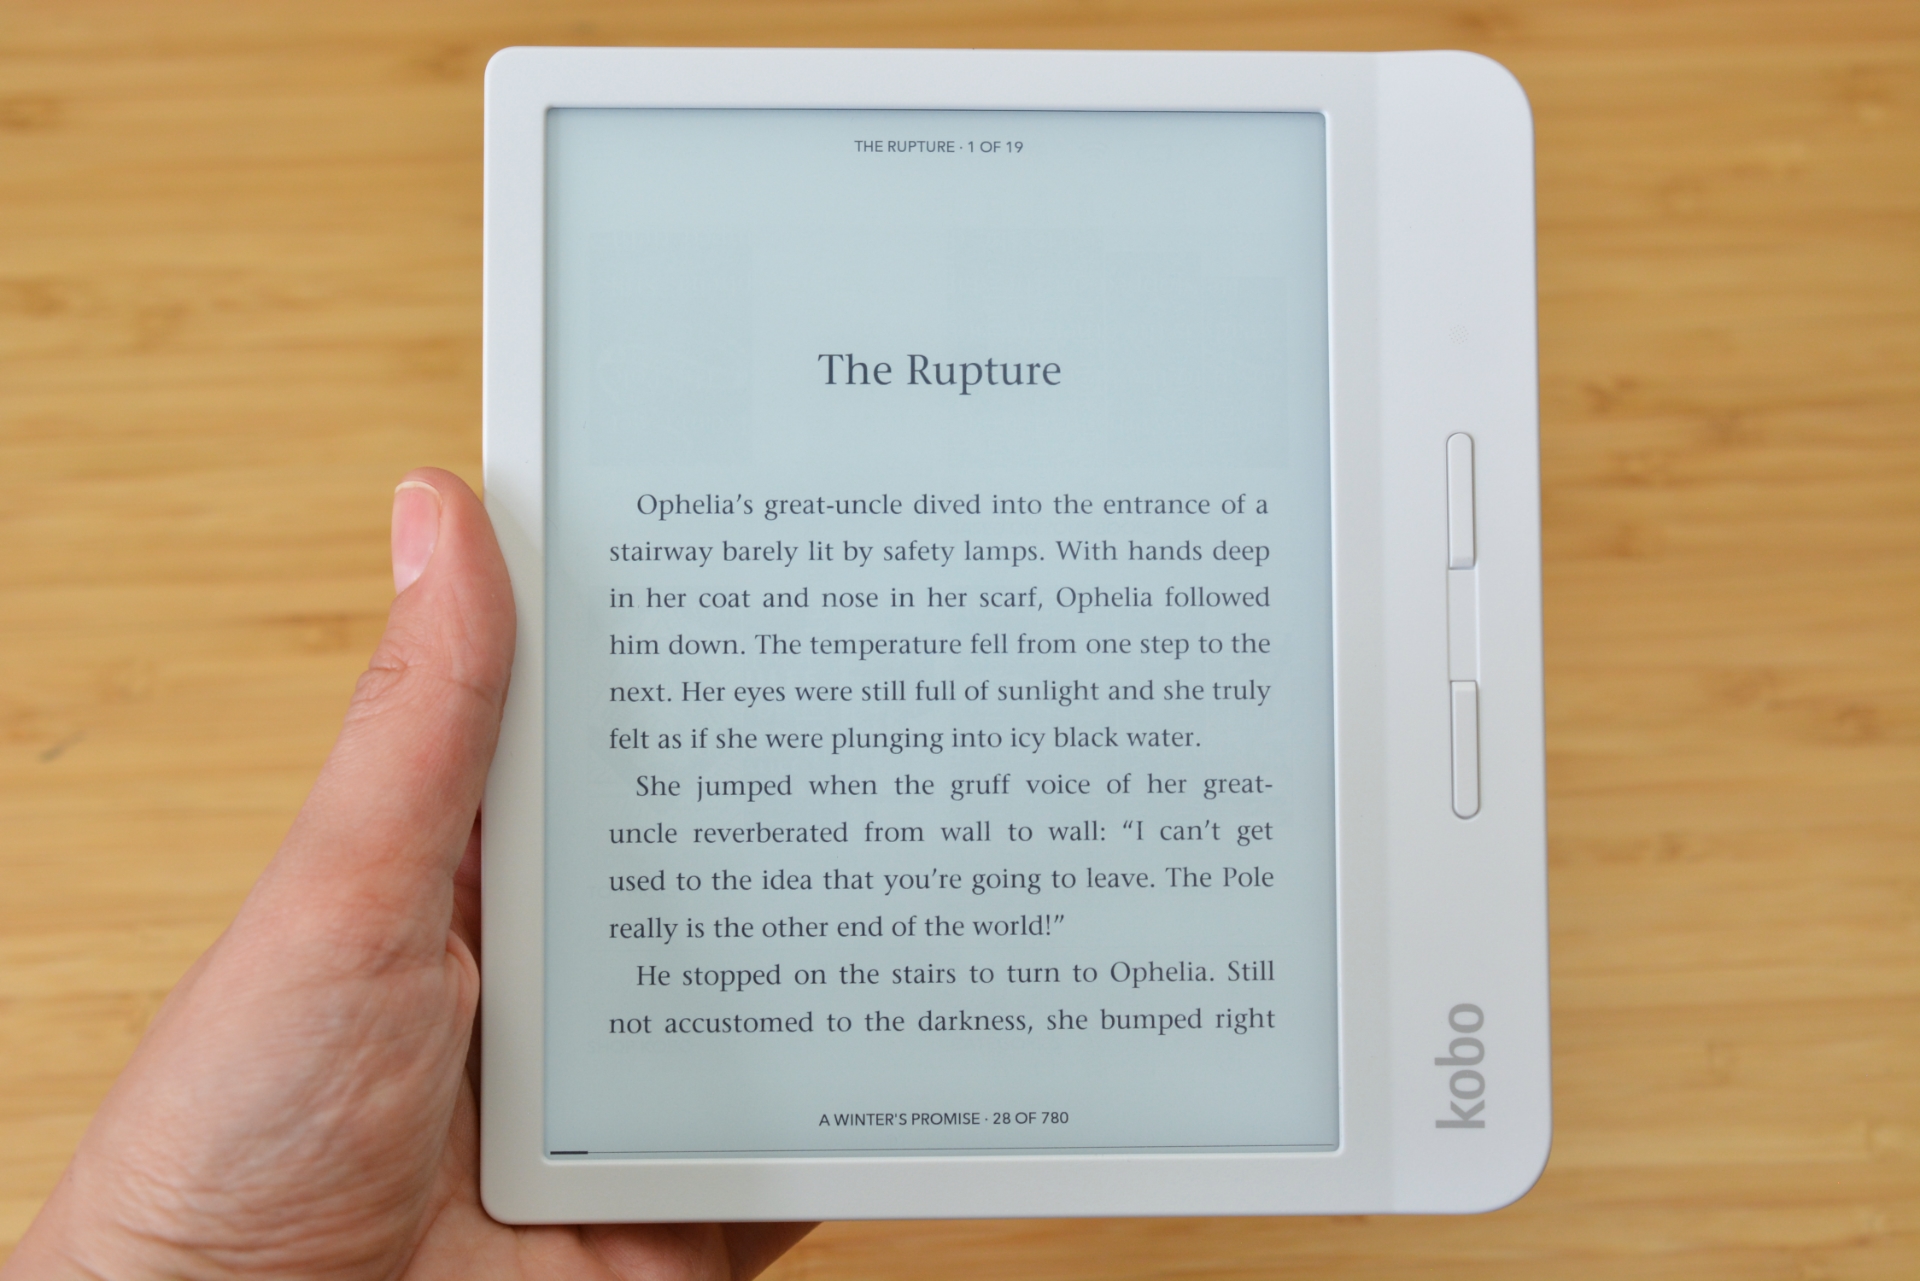 Kobo debuts Libra H2O e-reader, updates software with more tools for readers | Ars Technica